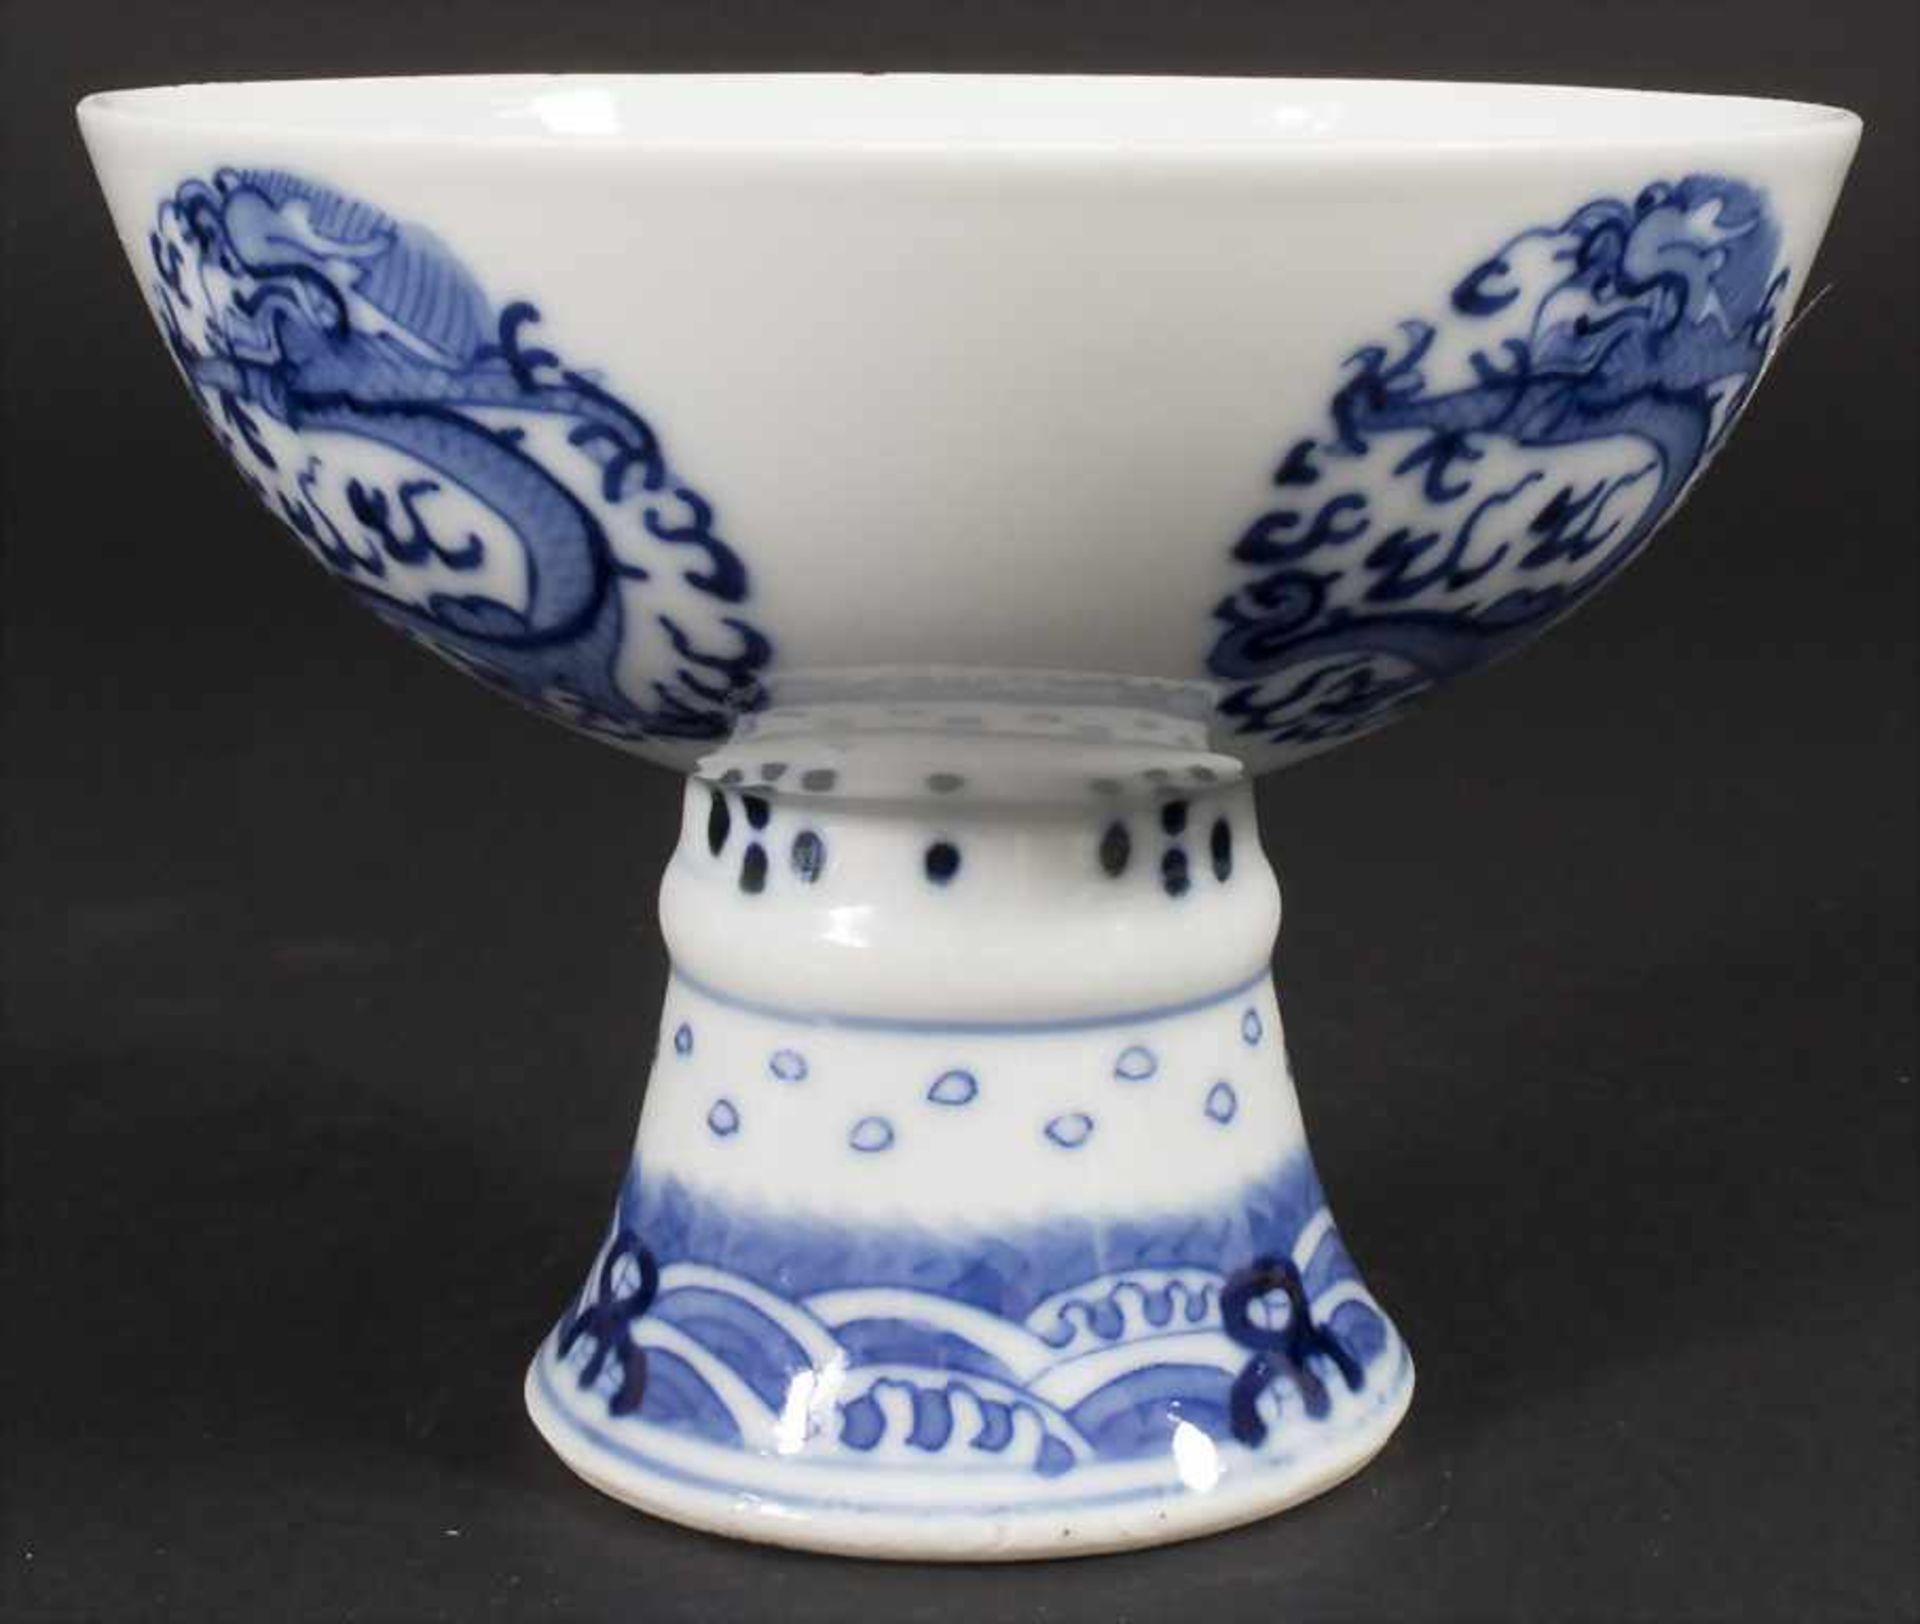 Porzellan-Fußschale / A porcelain footed bowl, China, Qing-Dynastie (1644-1911) - Image 2 of 4